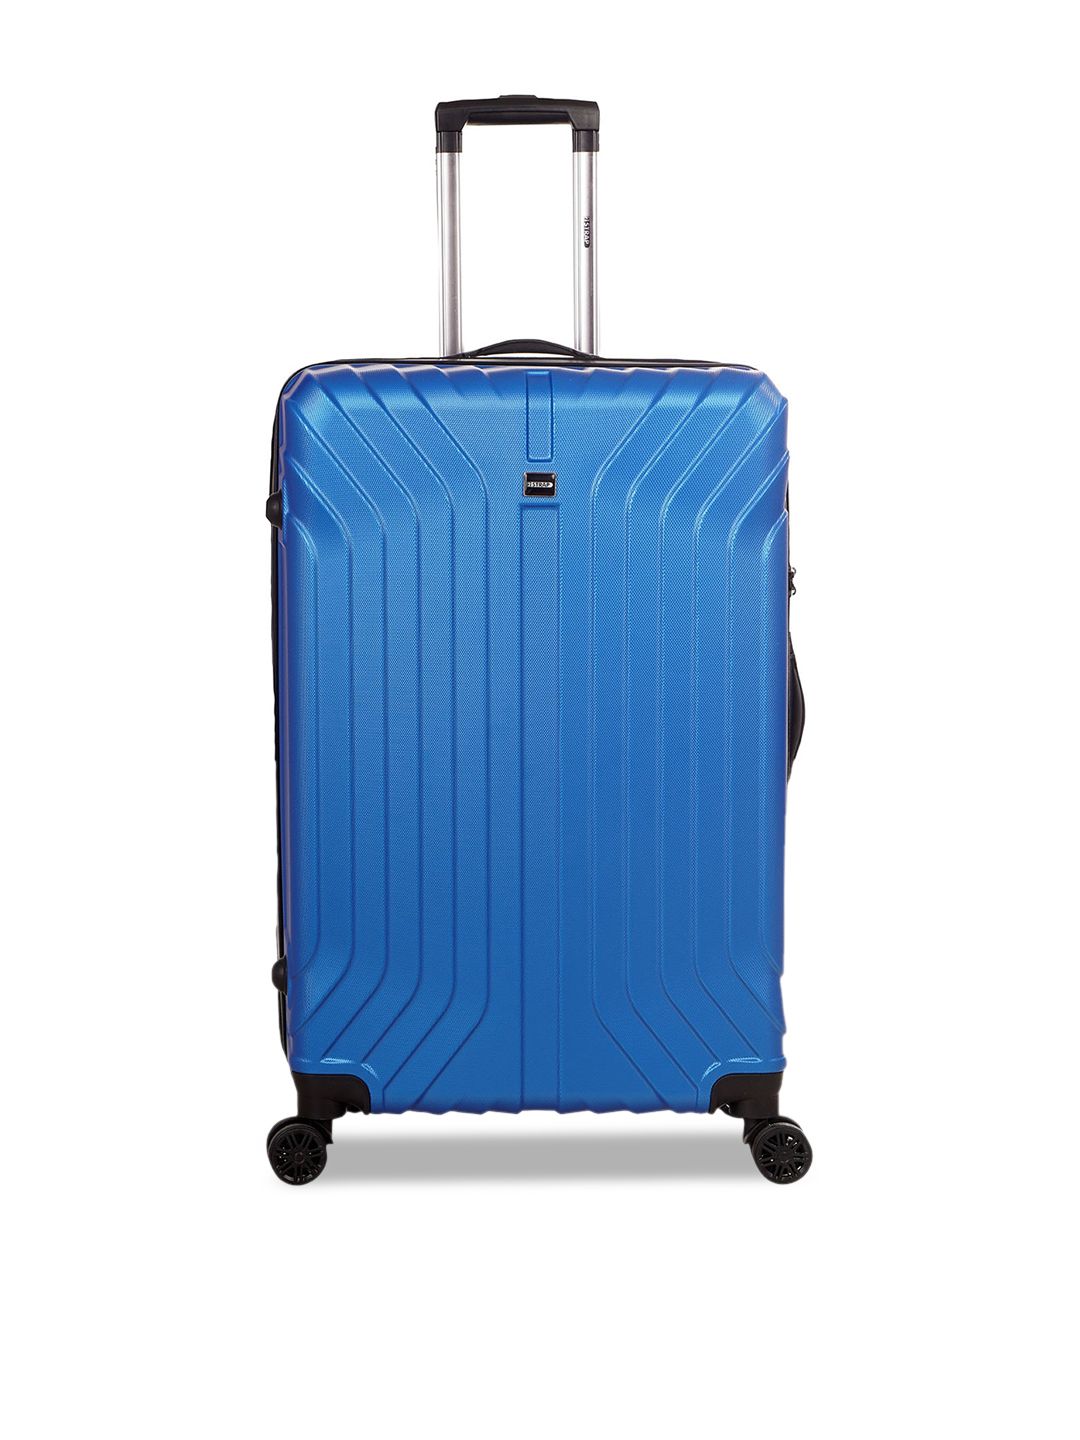 2 STRAP Blue Textured Large Hard Trolley Suitcase Price in India